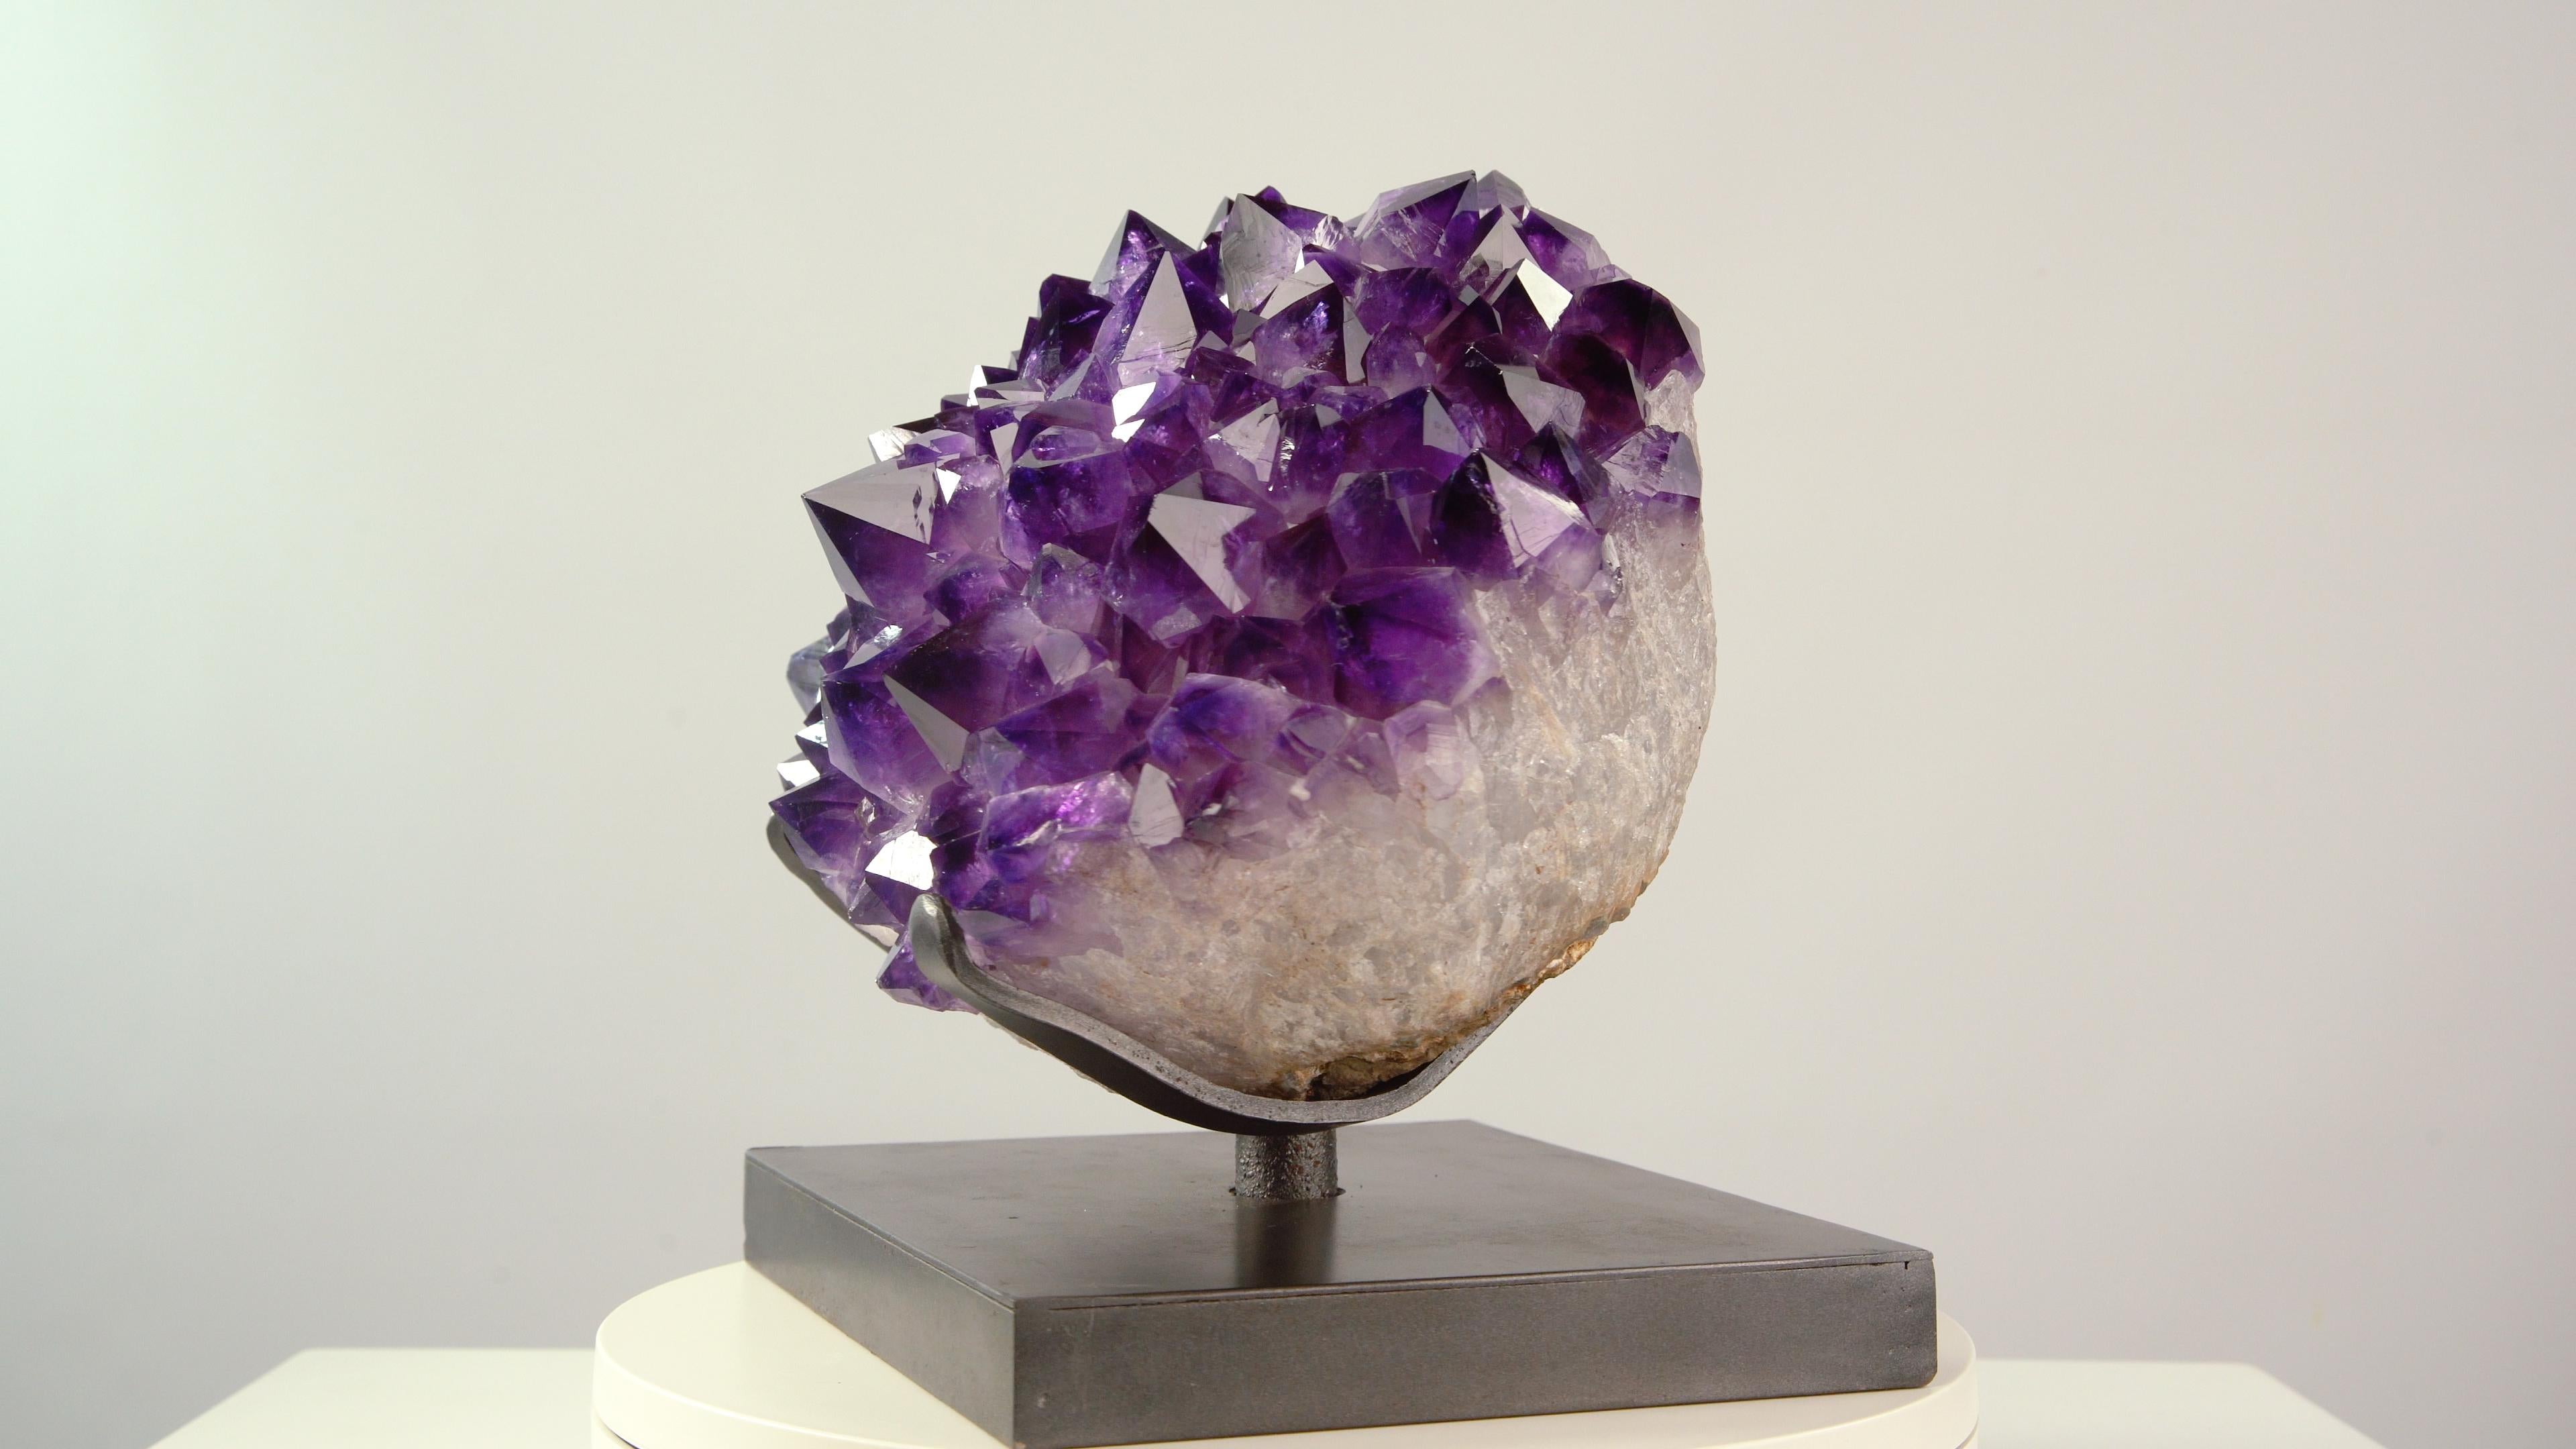 Extracted from a geode of unusually large and bright purple amethyst, this block contains beautifully formed and pristinely preserved crystals in a pleasing convex arrangement. The deep purple colour contrasts wonderfully with the white quartz